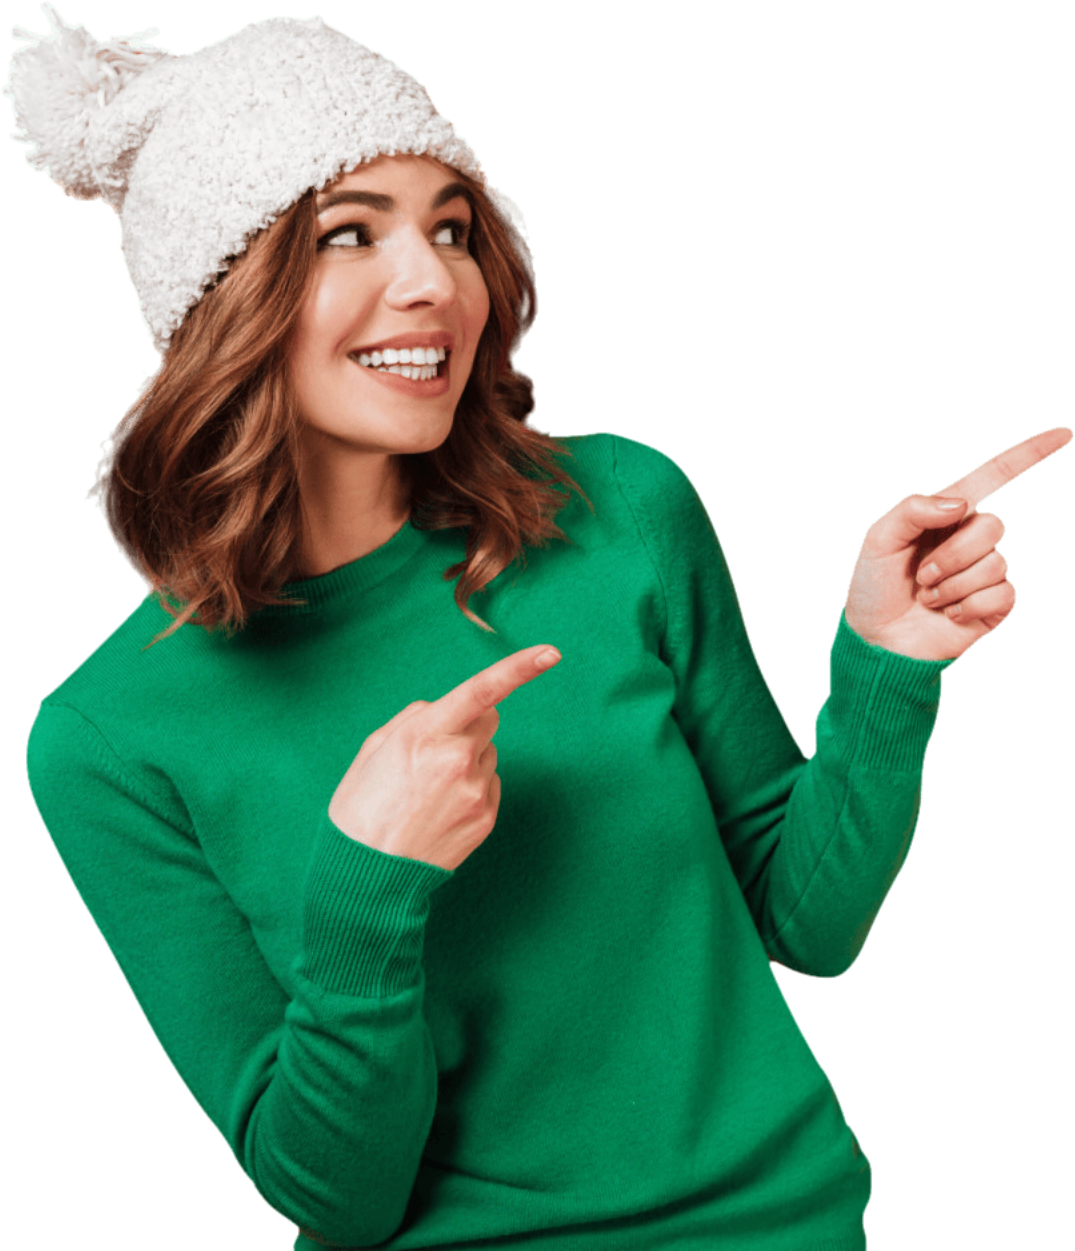 A woman wearing a green sweater and a white hat points to the side